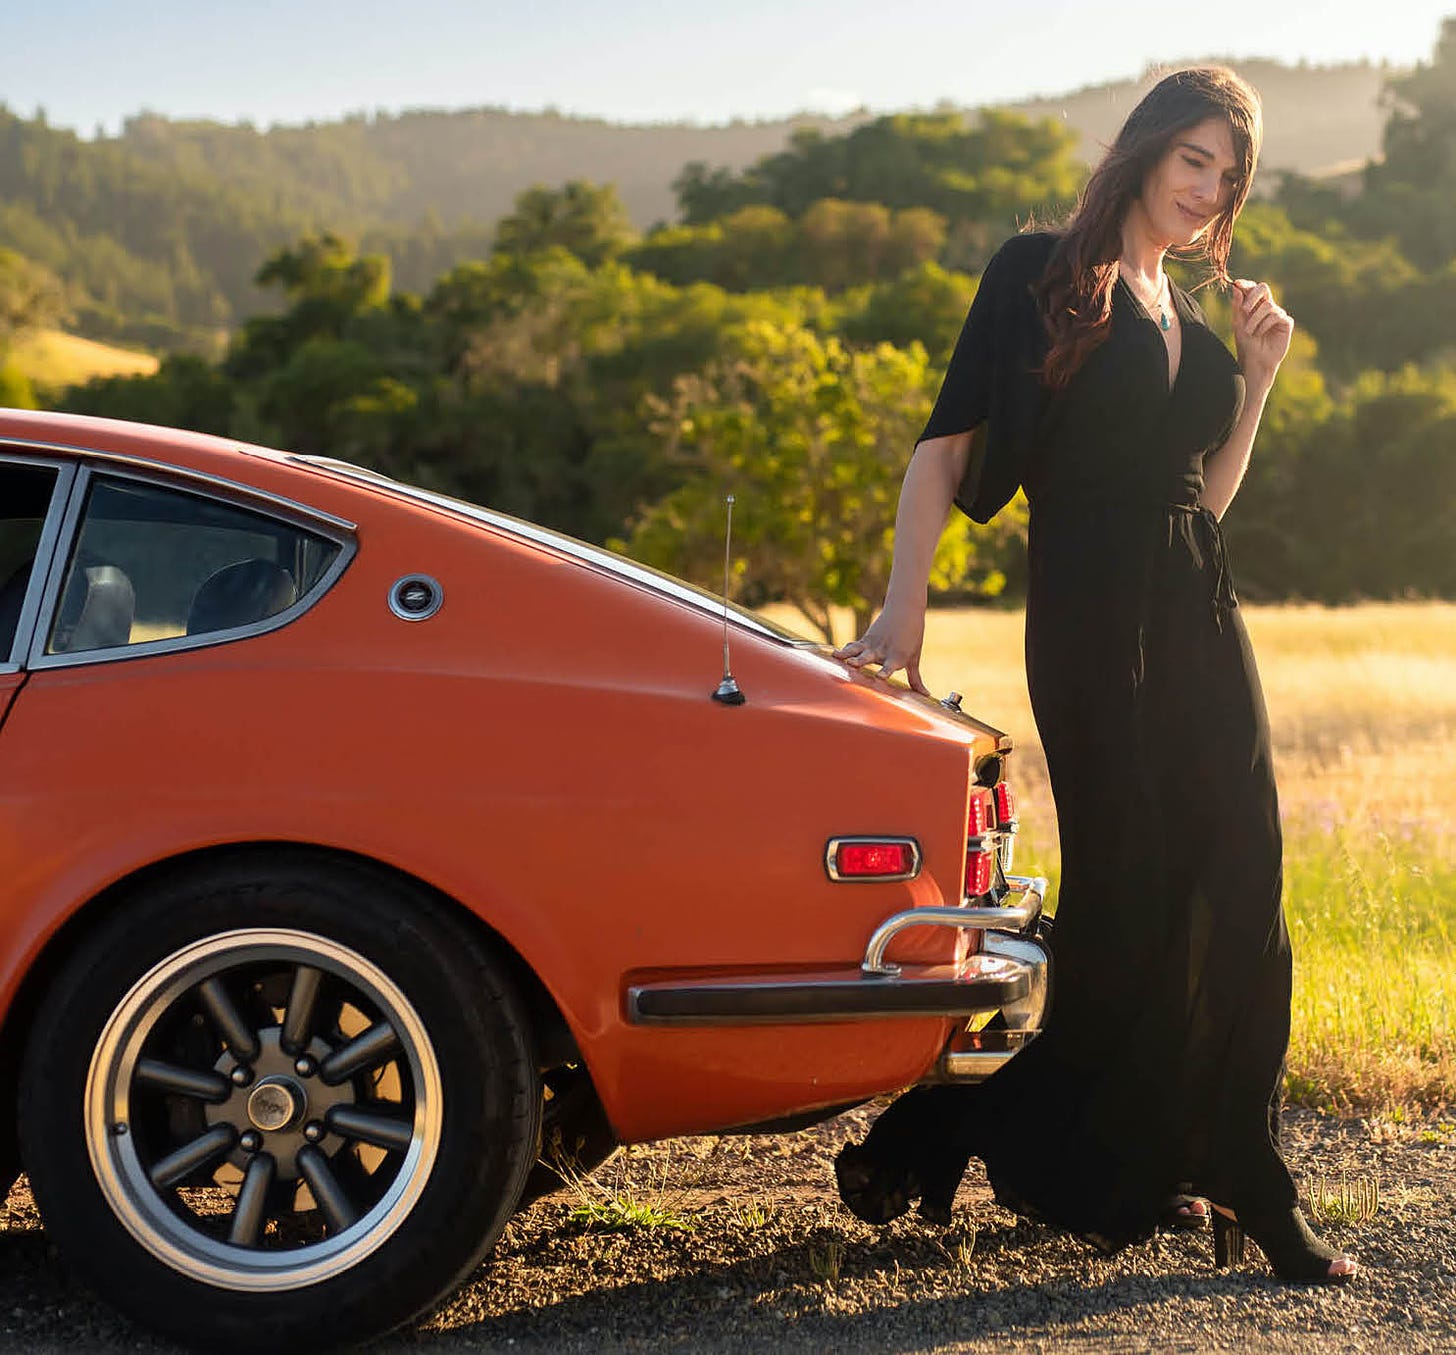 Cara Esten, a transgender woman wearing a long flowing black dress, poses with her bright orange Datsun 240Z, her hand resting on the back trunk lid from the vehicle's side profile against a sunny open meadow in the background. For the new book 'We Deserve This' by Victoria Scott.